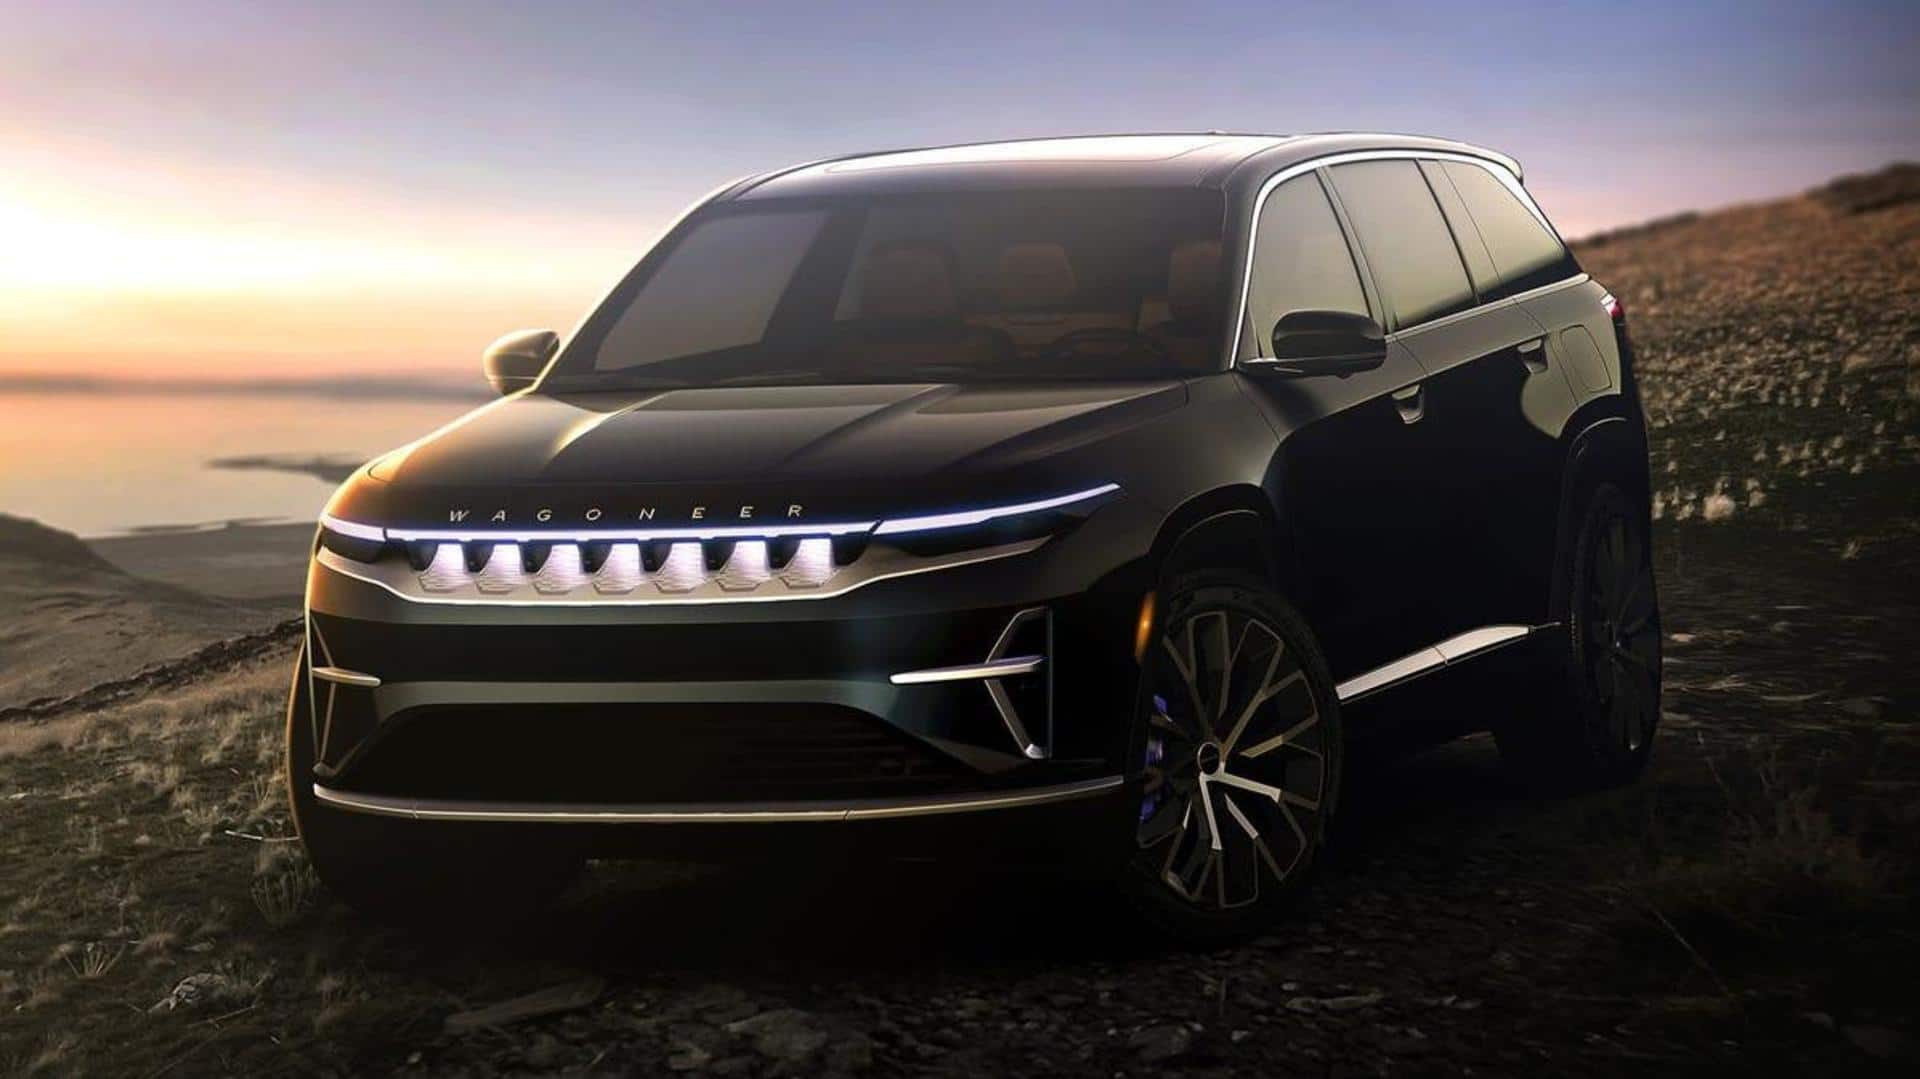 Win $40,000 for naming Jeep's new electric car: Here's how